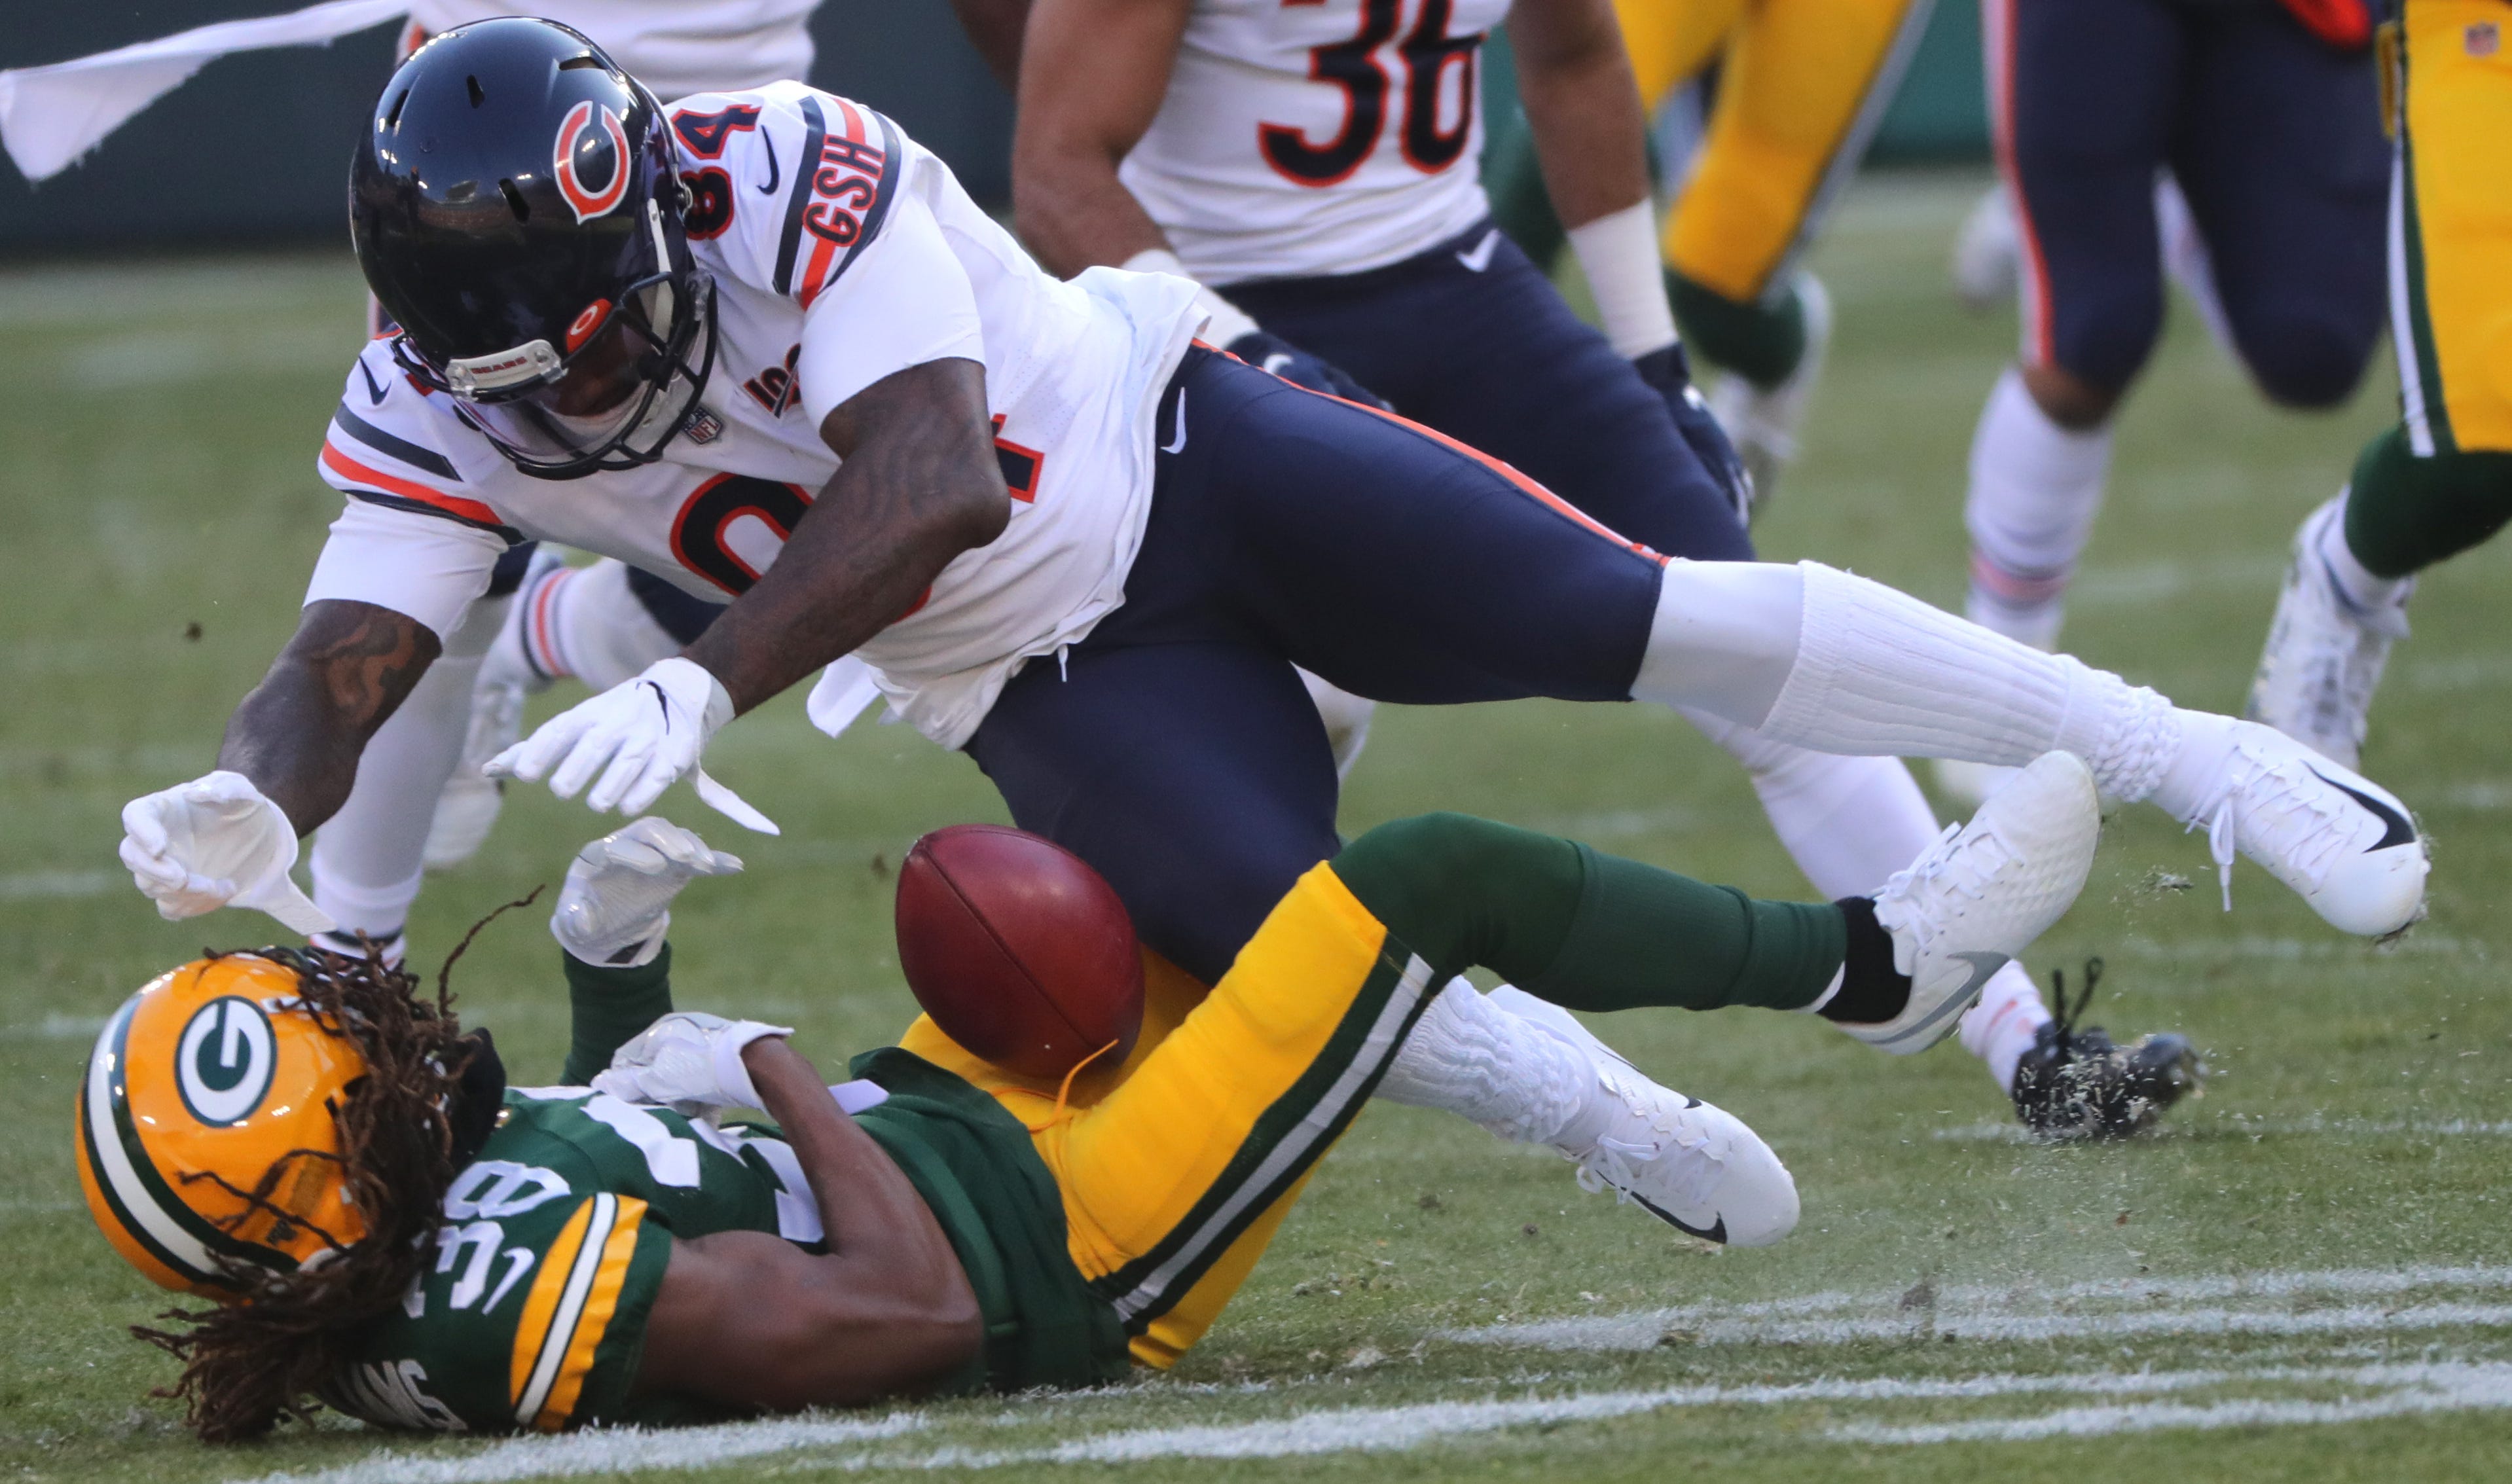 Chicago Bears wide receiver Cordarrelle Patterson (84) drills Green Bay Packers cornerback Tramon Williams (38) while field a punt during the first quarter of their game Sunday, December 15, 2019 at Lambeau Field in Green Bay, Wis. The Bears were penalized for interference on the play.

MARK HOFFMAN/MILWAUKEE JOURNAL SENTINEL